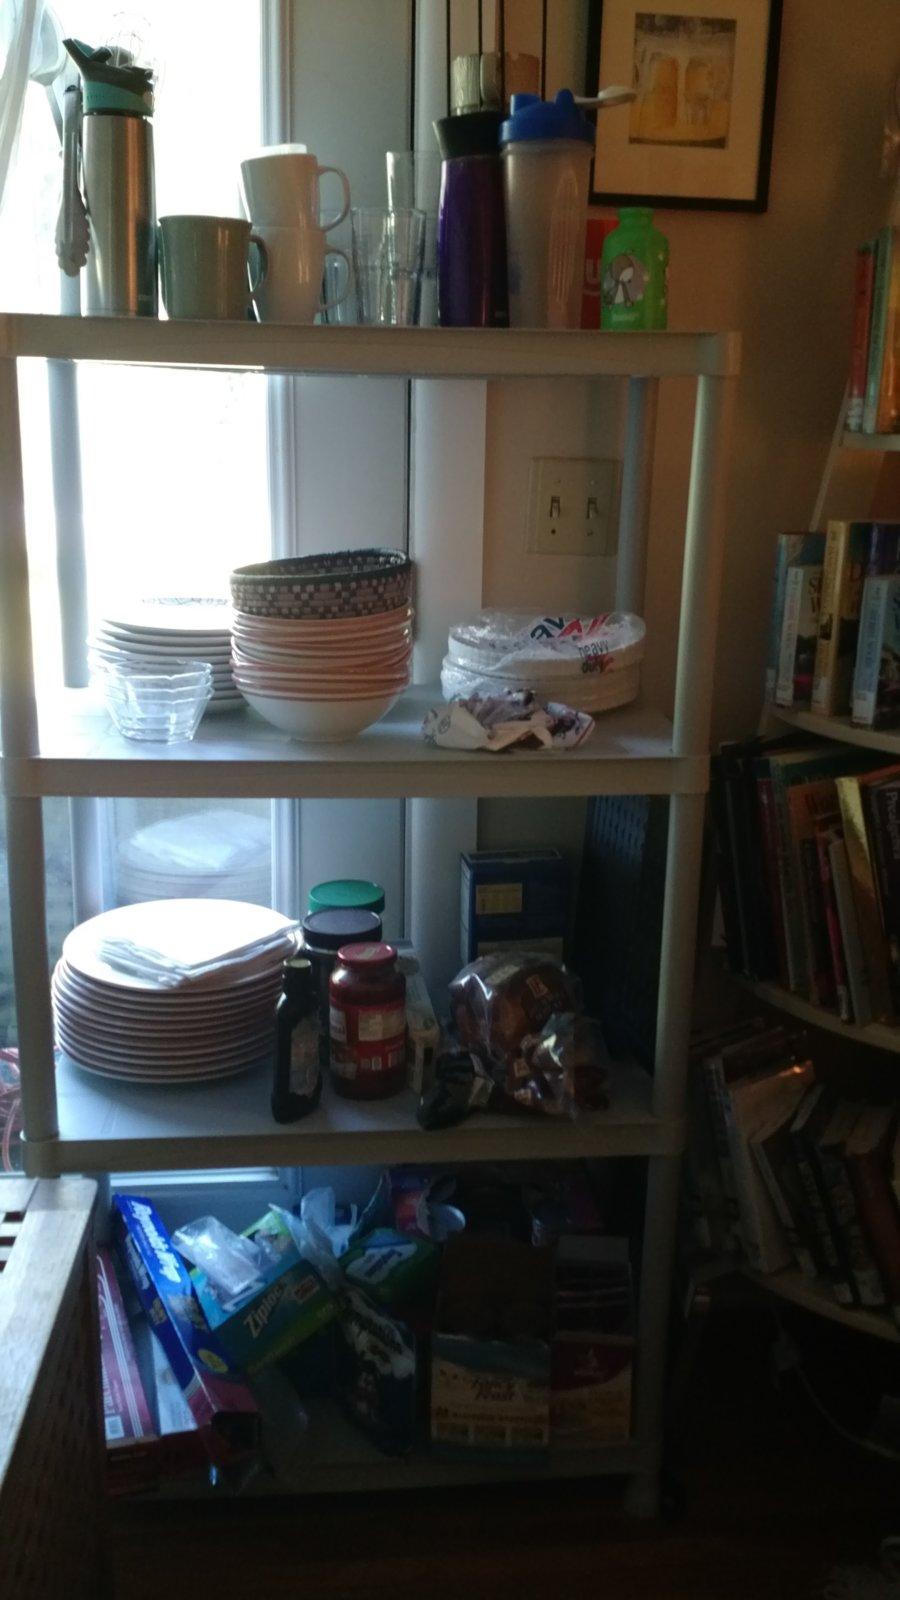 Shelf of the few dishes and glasses we've been using.